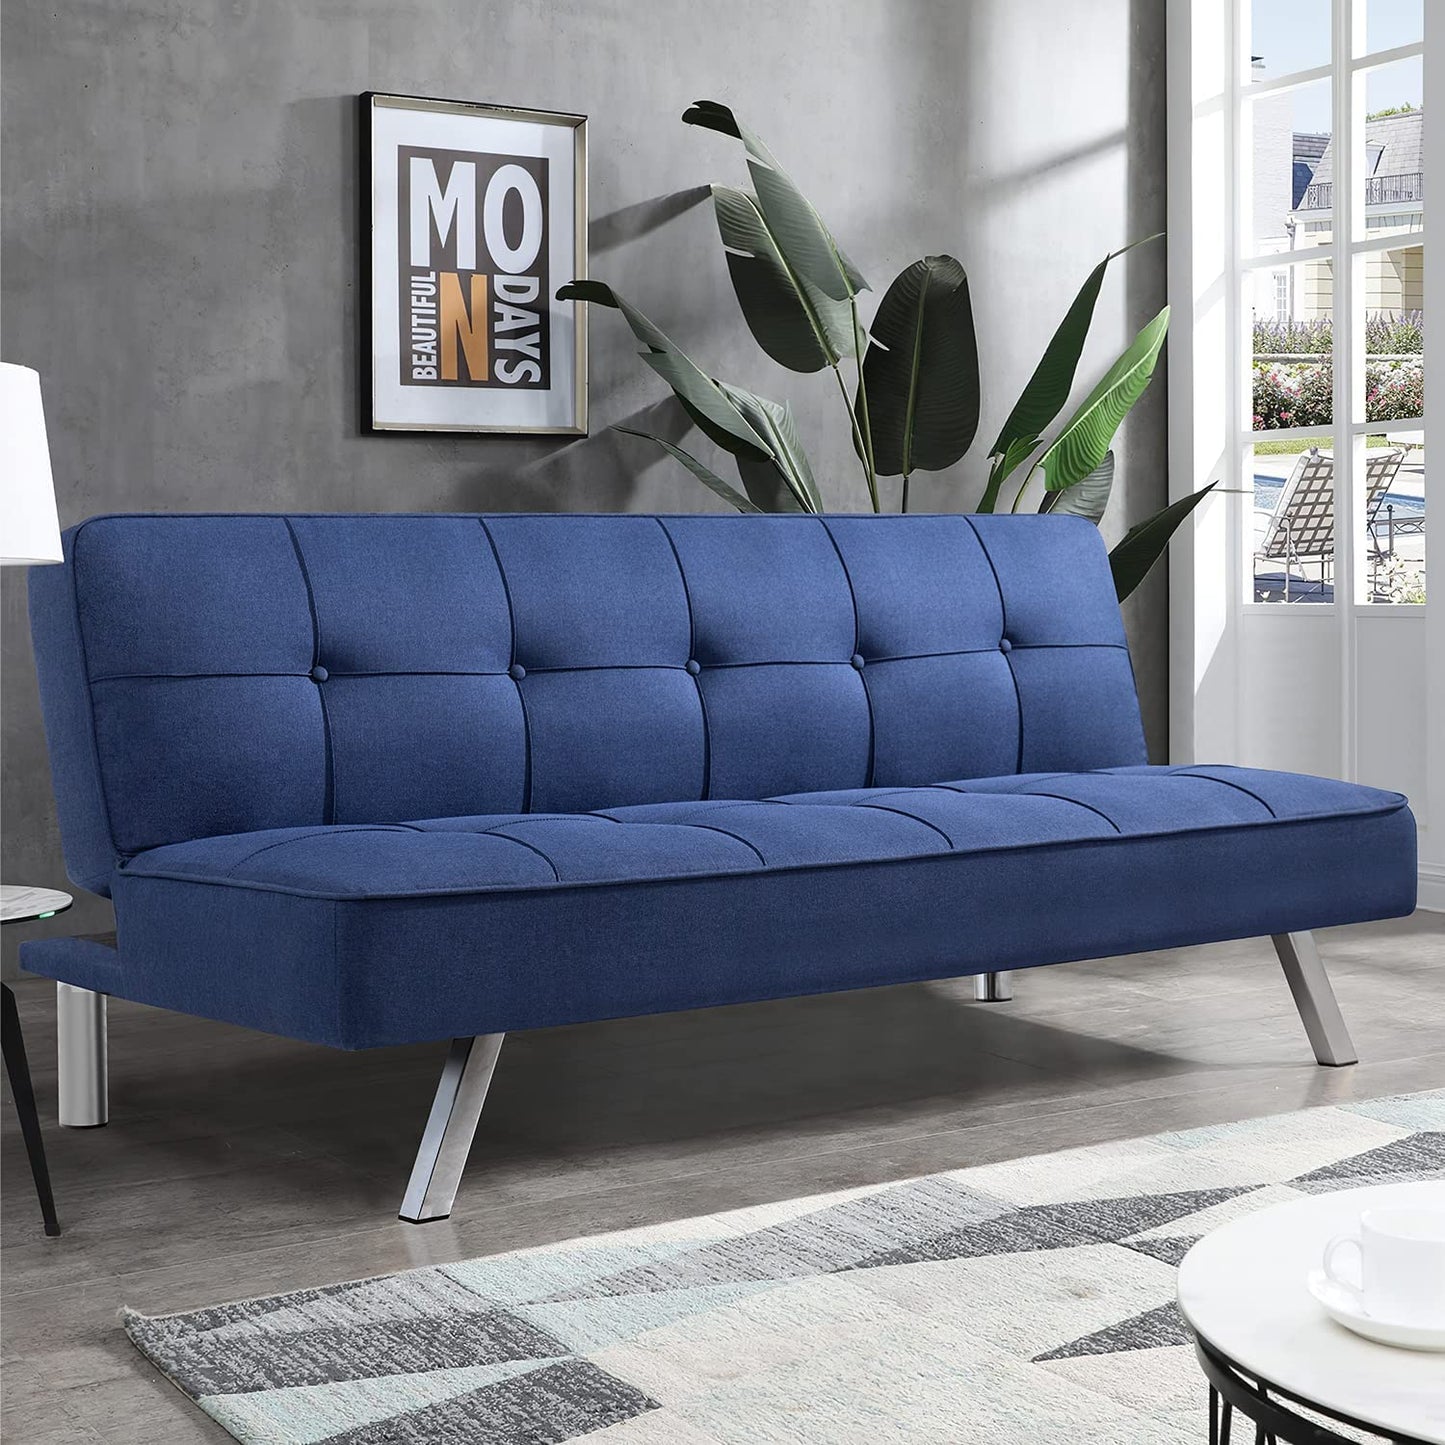 Bed For Living Room Home Futon Couch